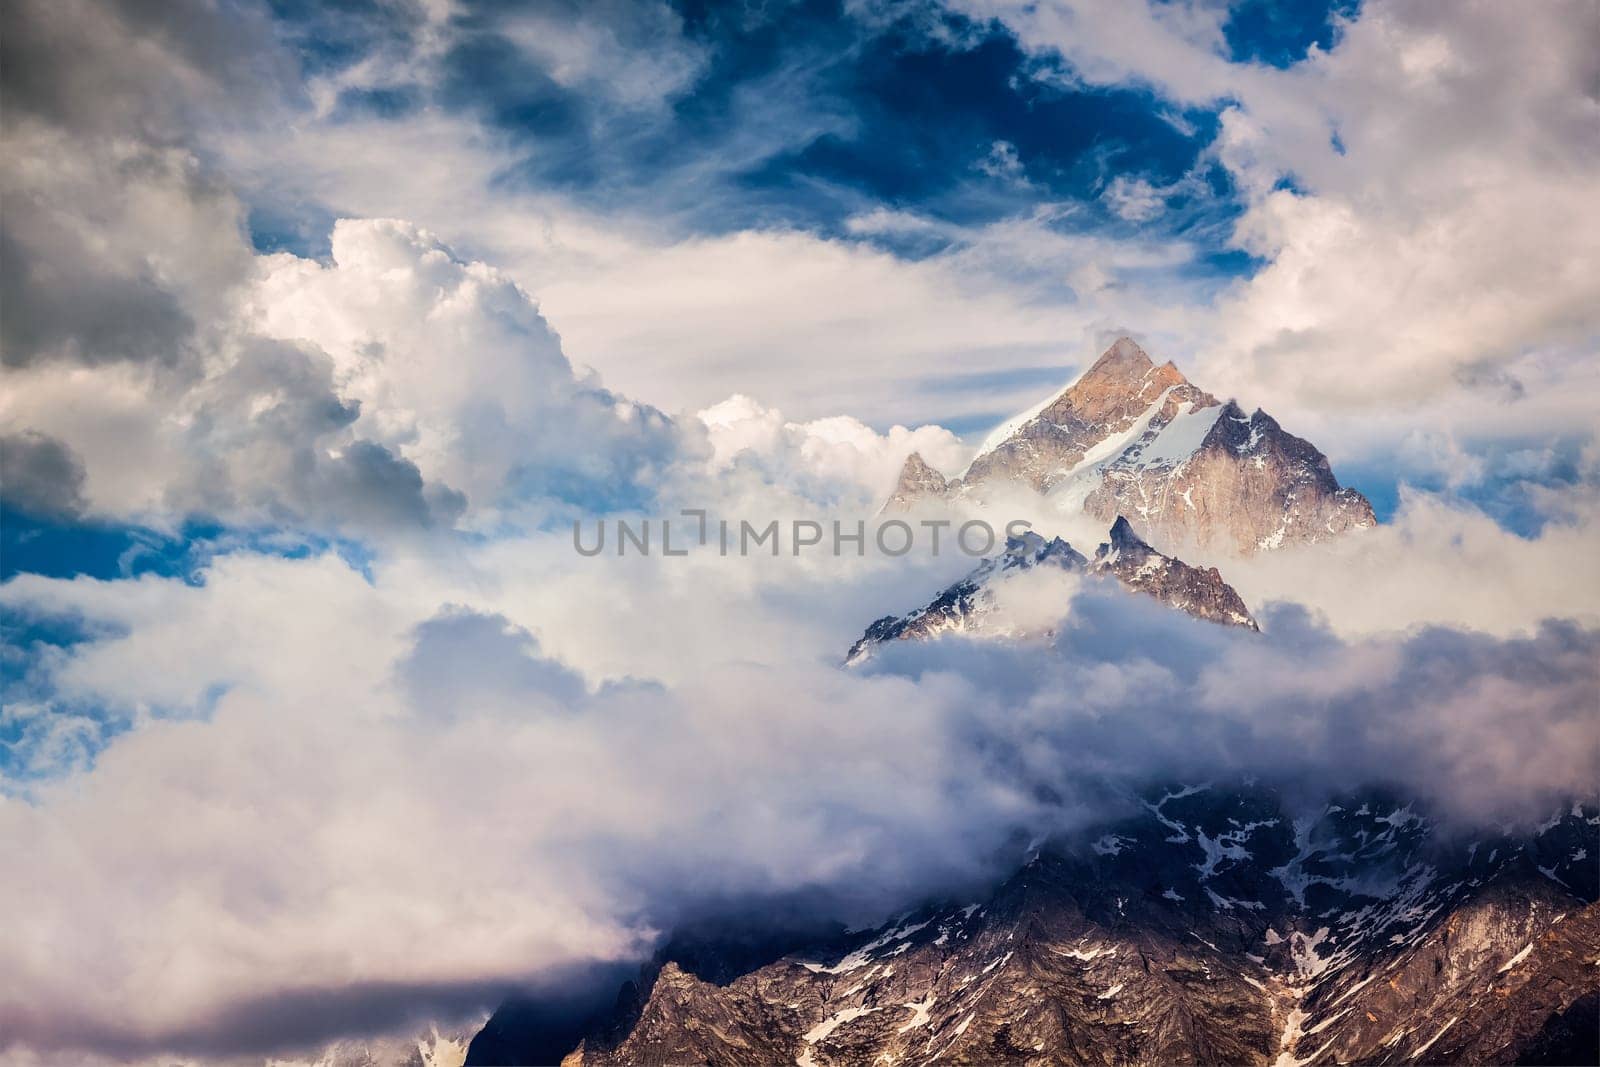 Snowcapped summit top of mountain in Himalayas by dimol